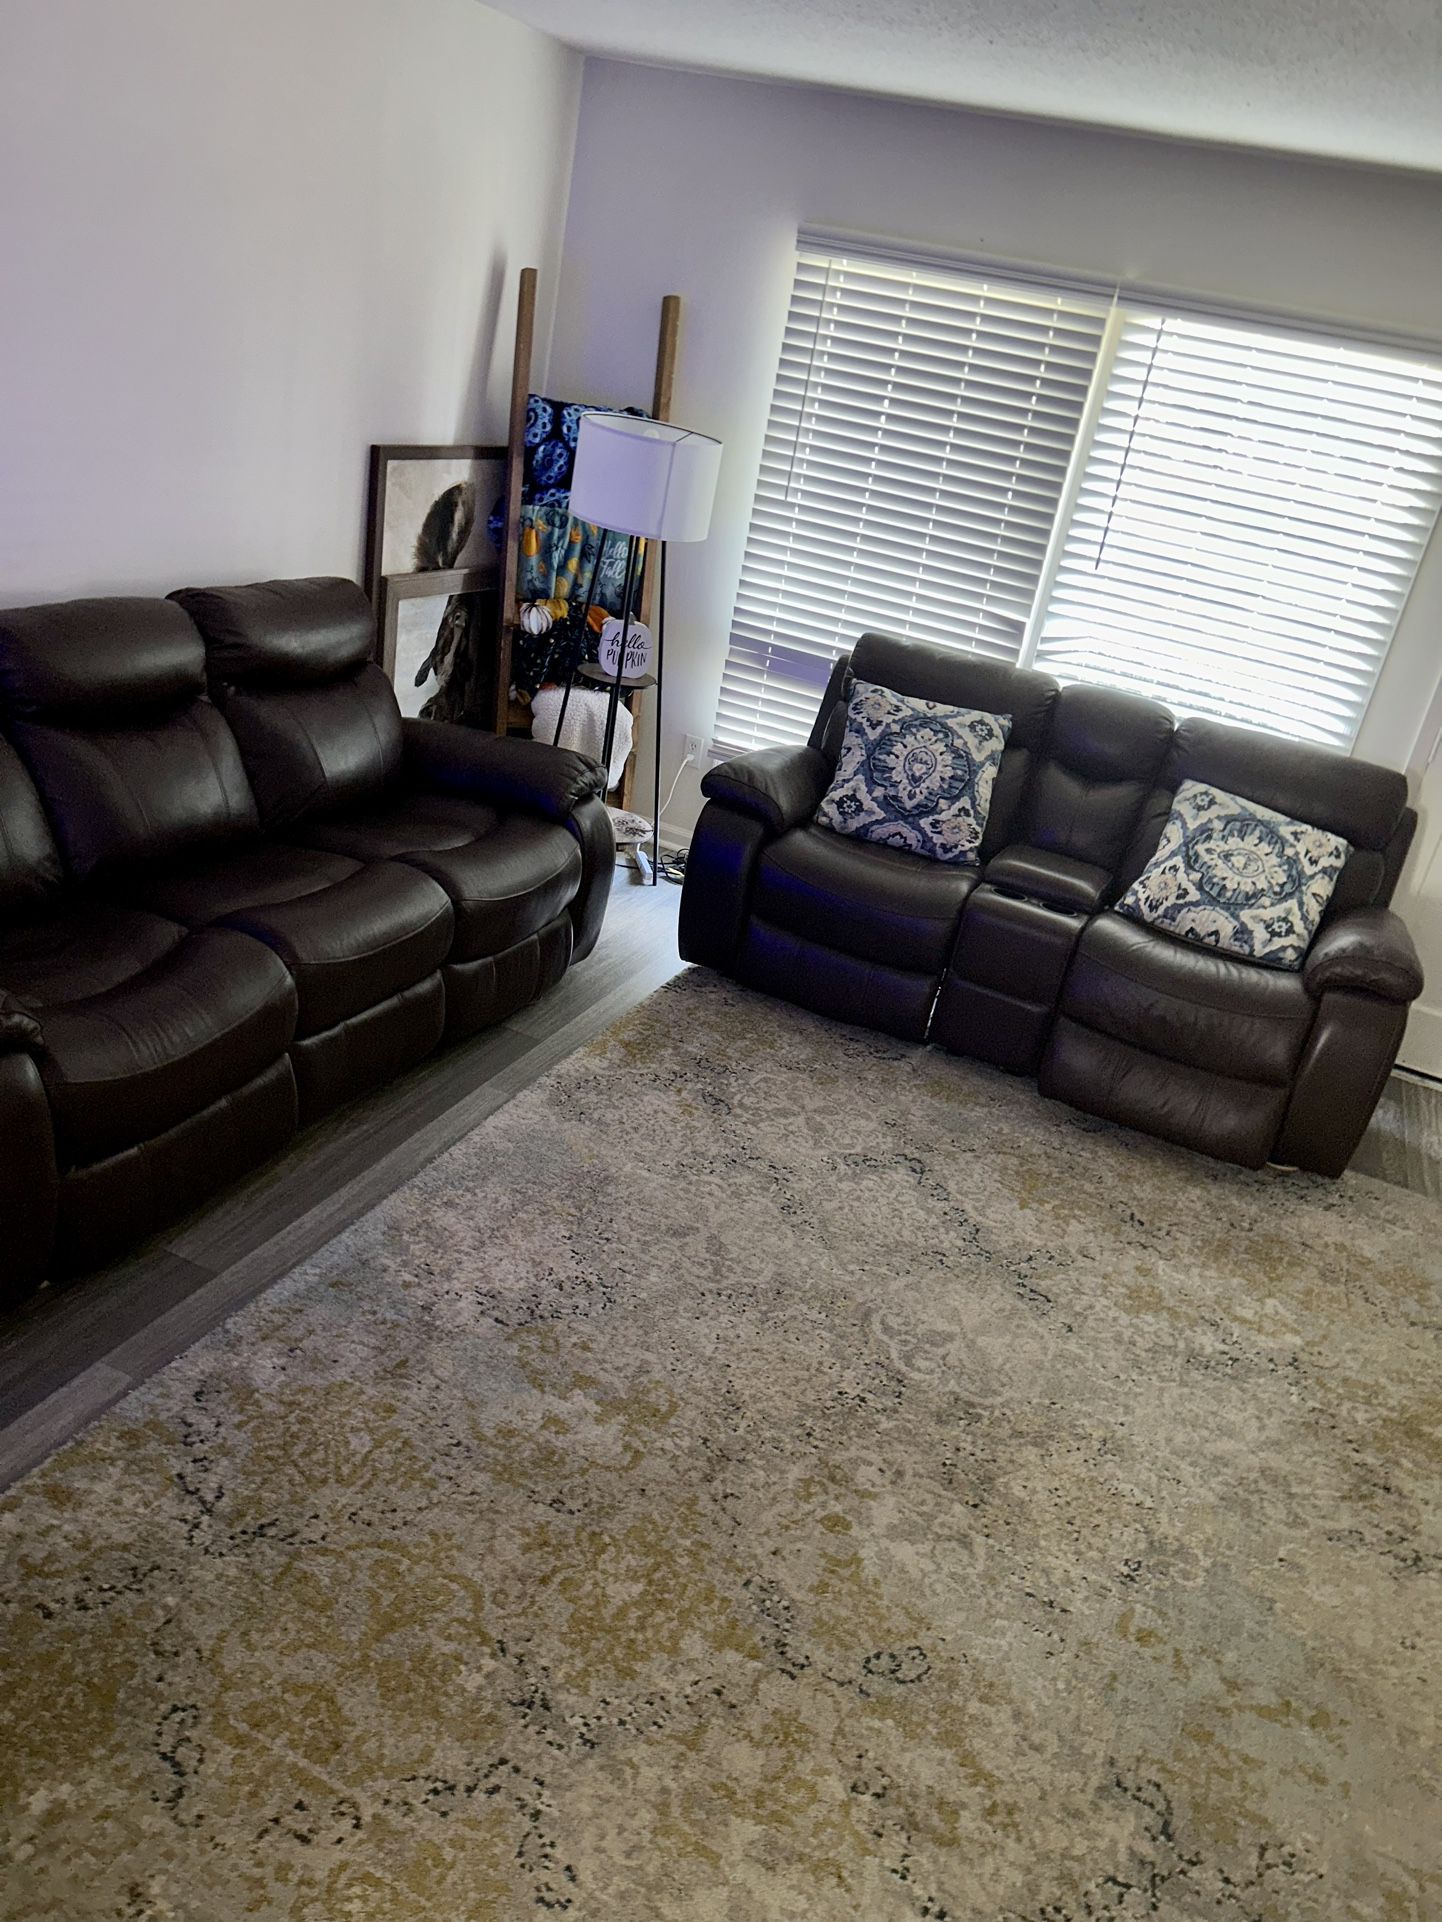 Leather Couches, Rugs, And Pillows